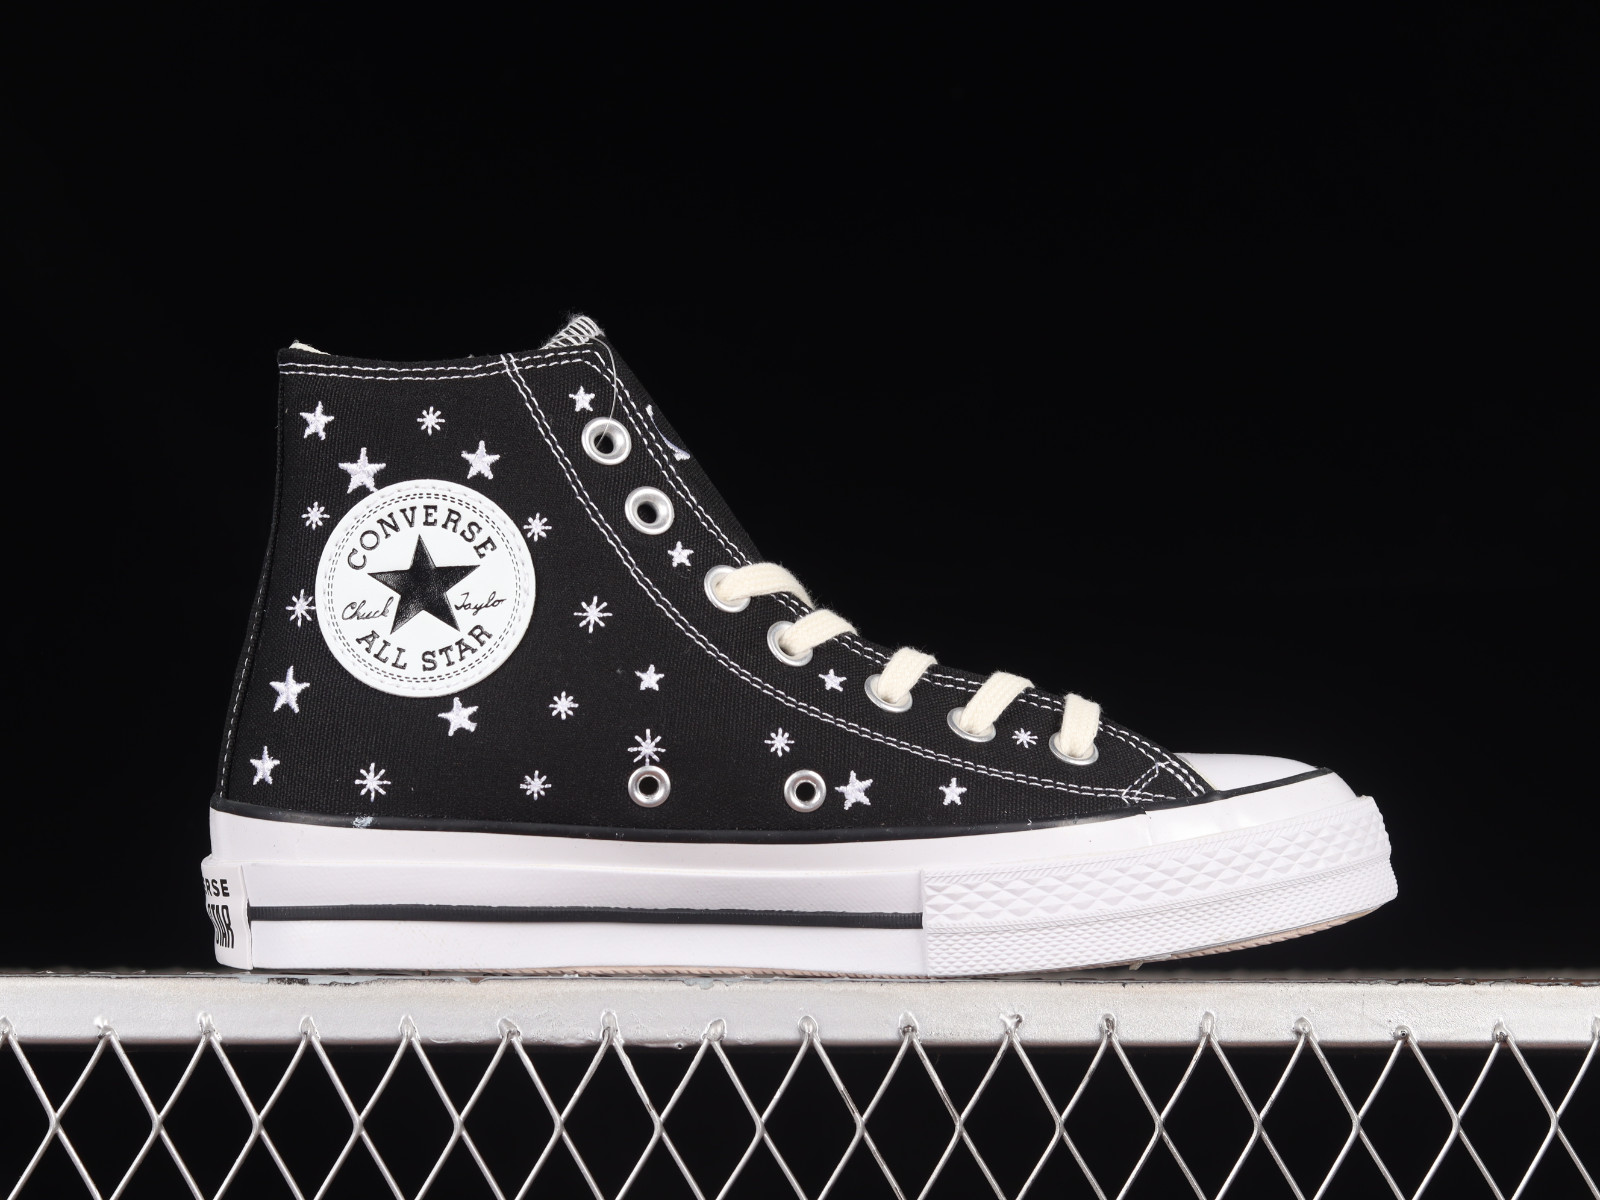 Converse Chuck Taylor All Star High Embroidered Black Egret Vintage White A03723C -